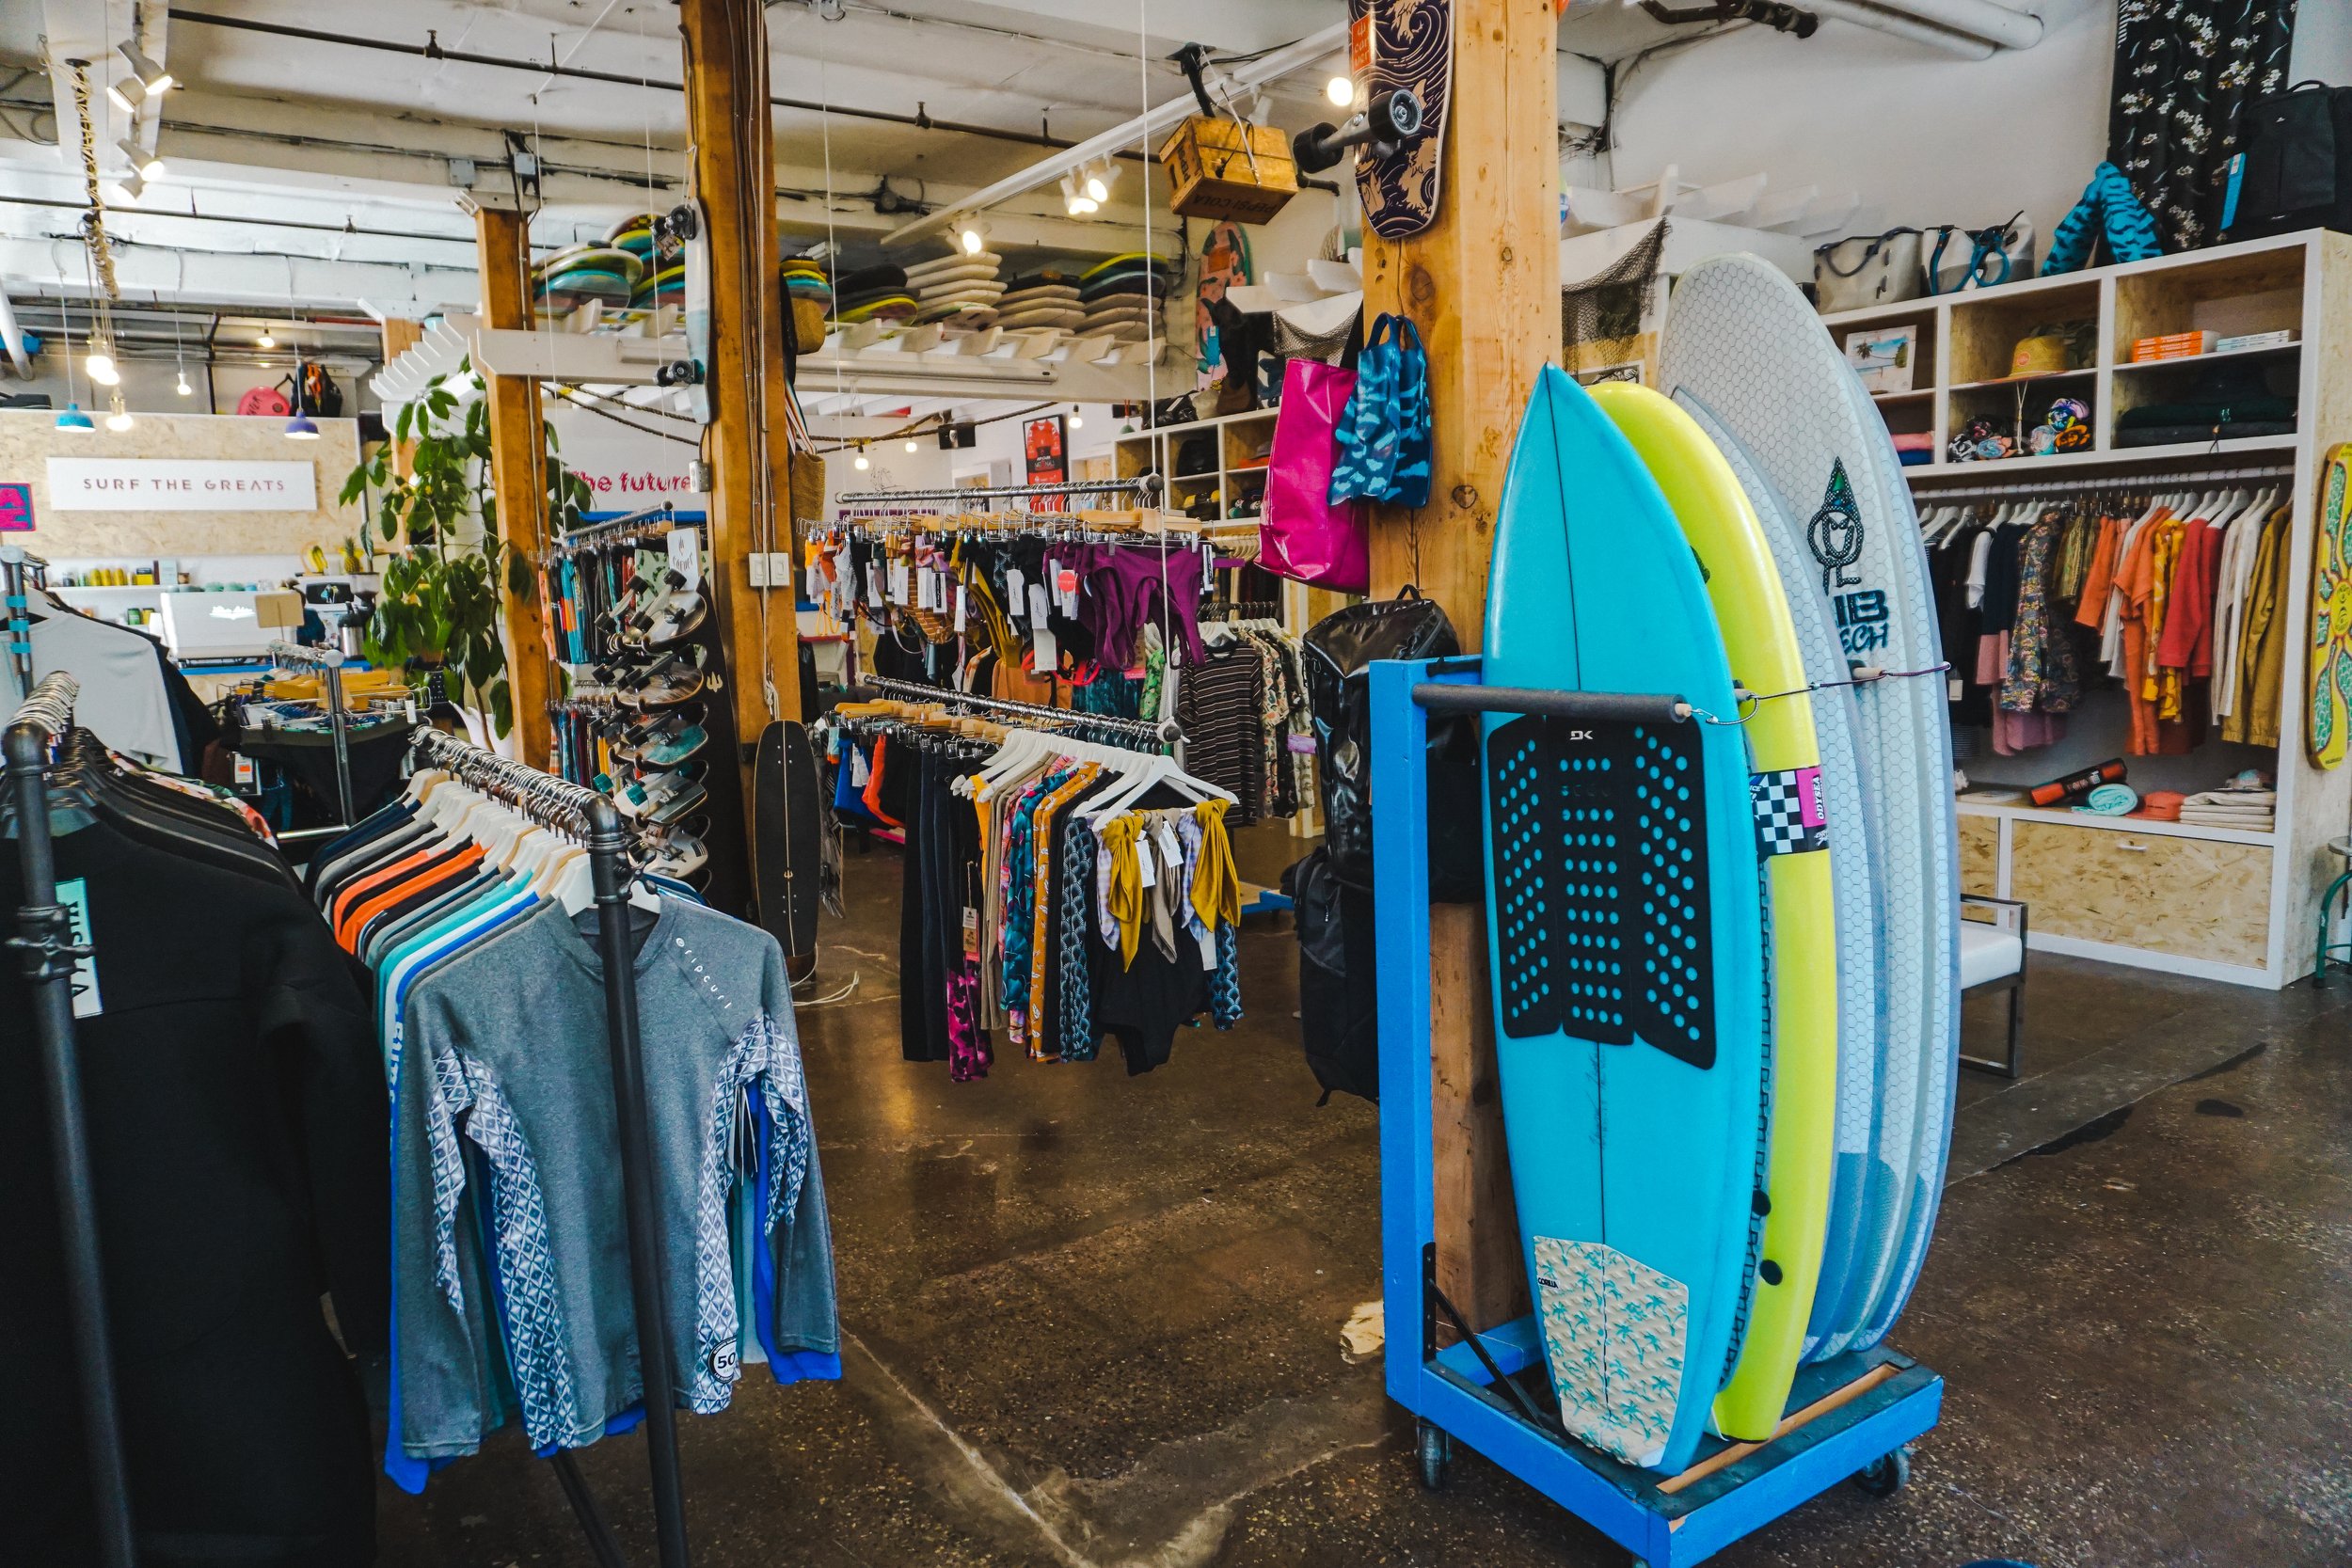 Surfing the Great Lakes with Surf the Greats - And How You Can